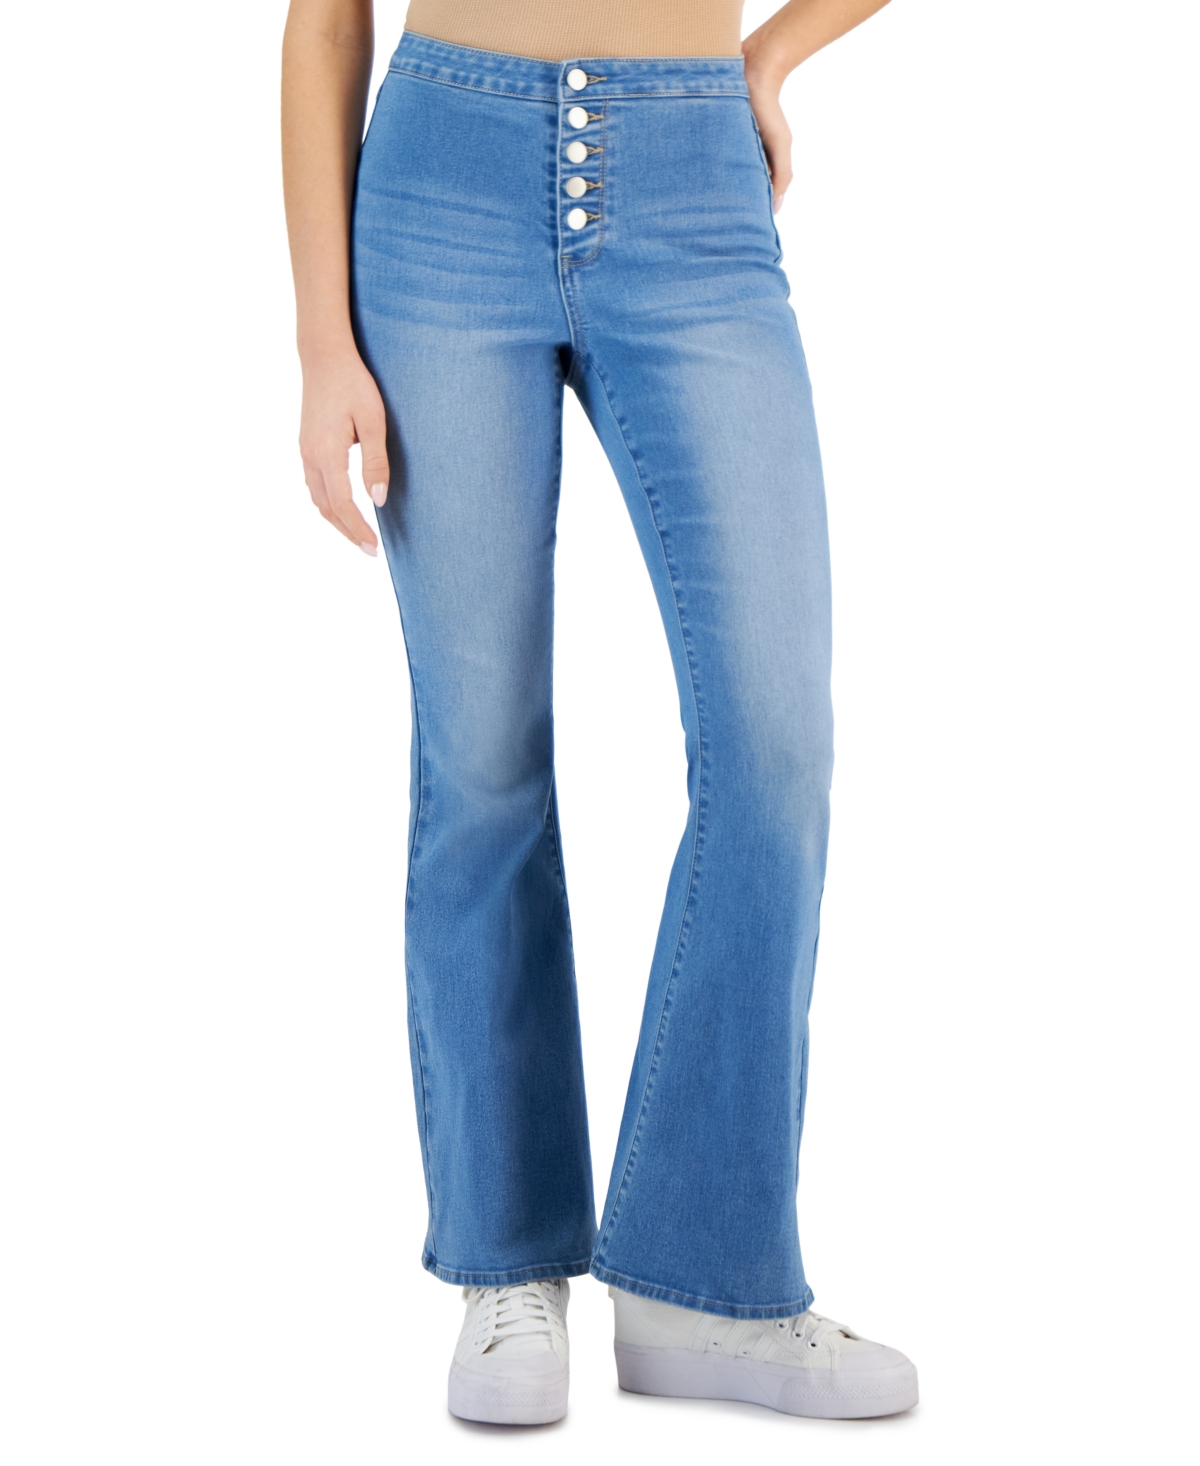 Juniors' Curvy High-Rise Flare-Leg Jeans - Andes Wash